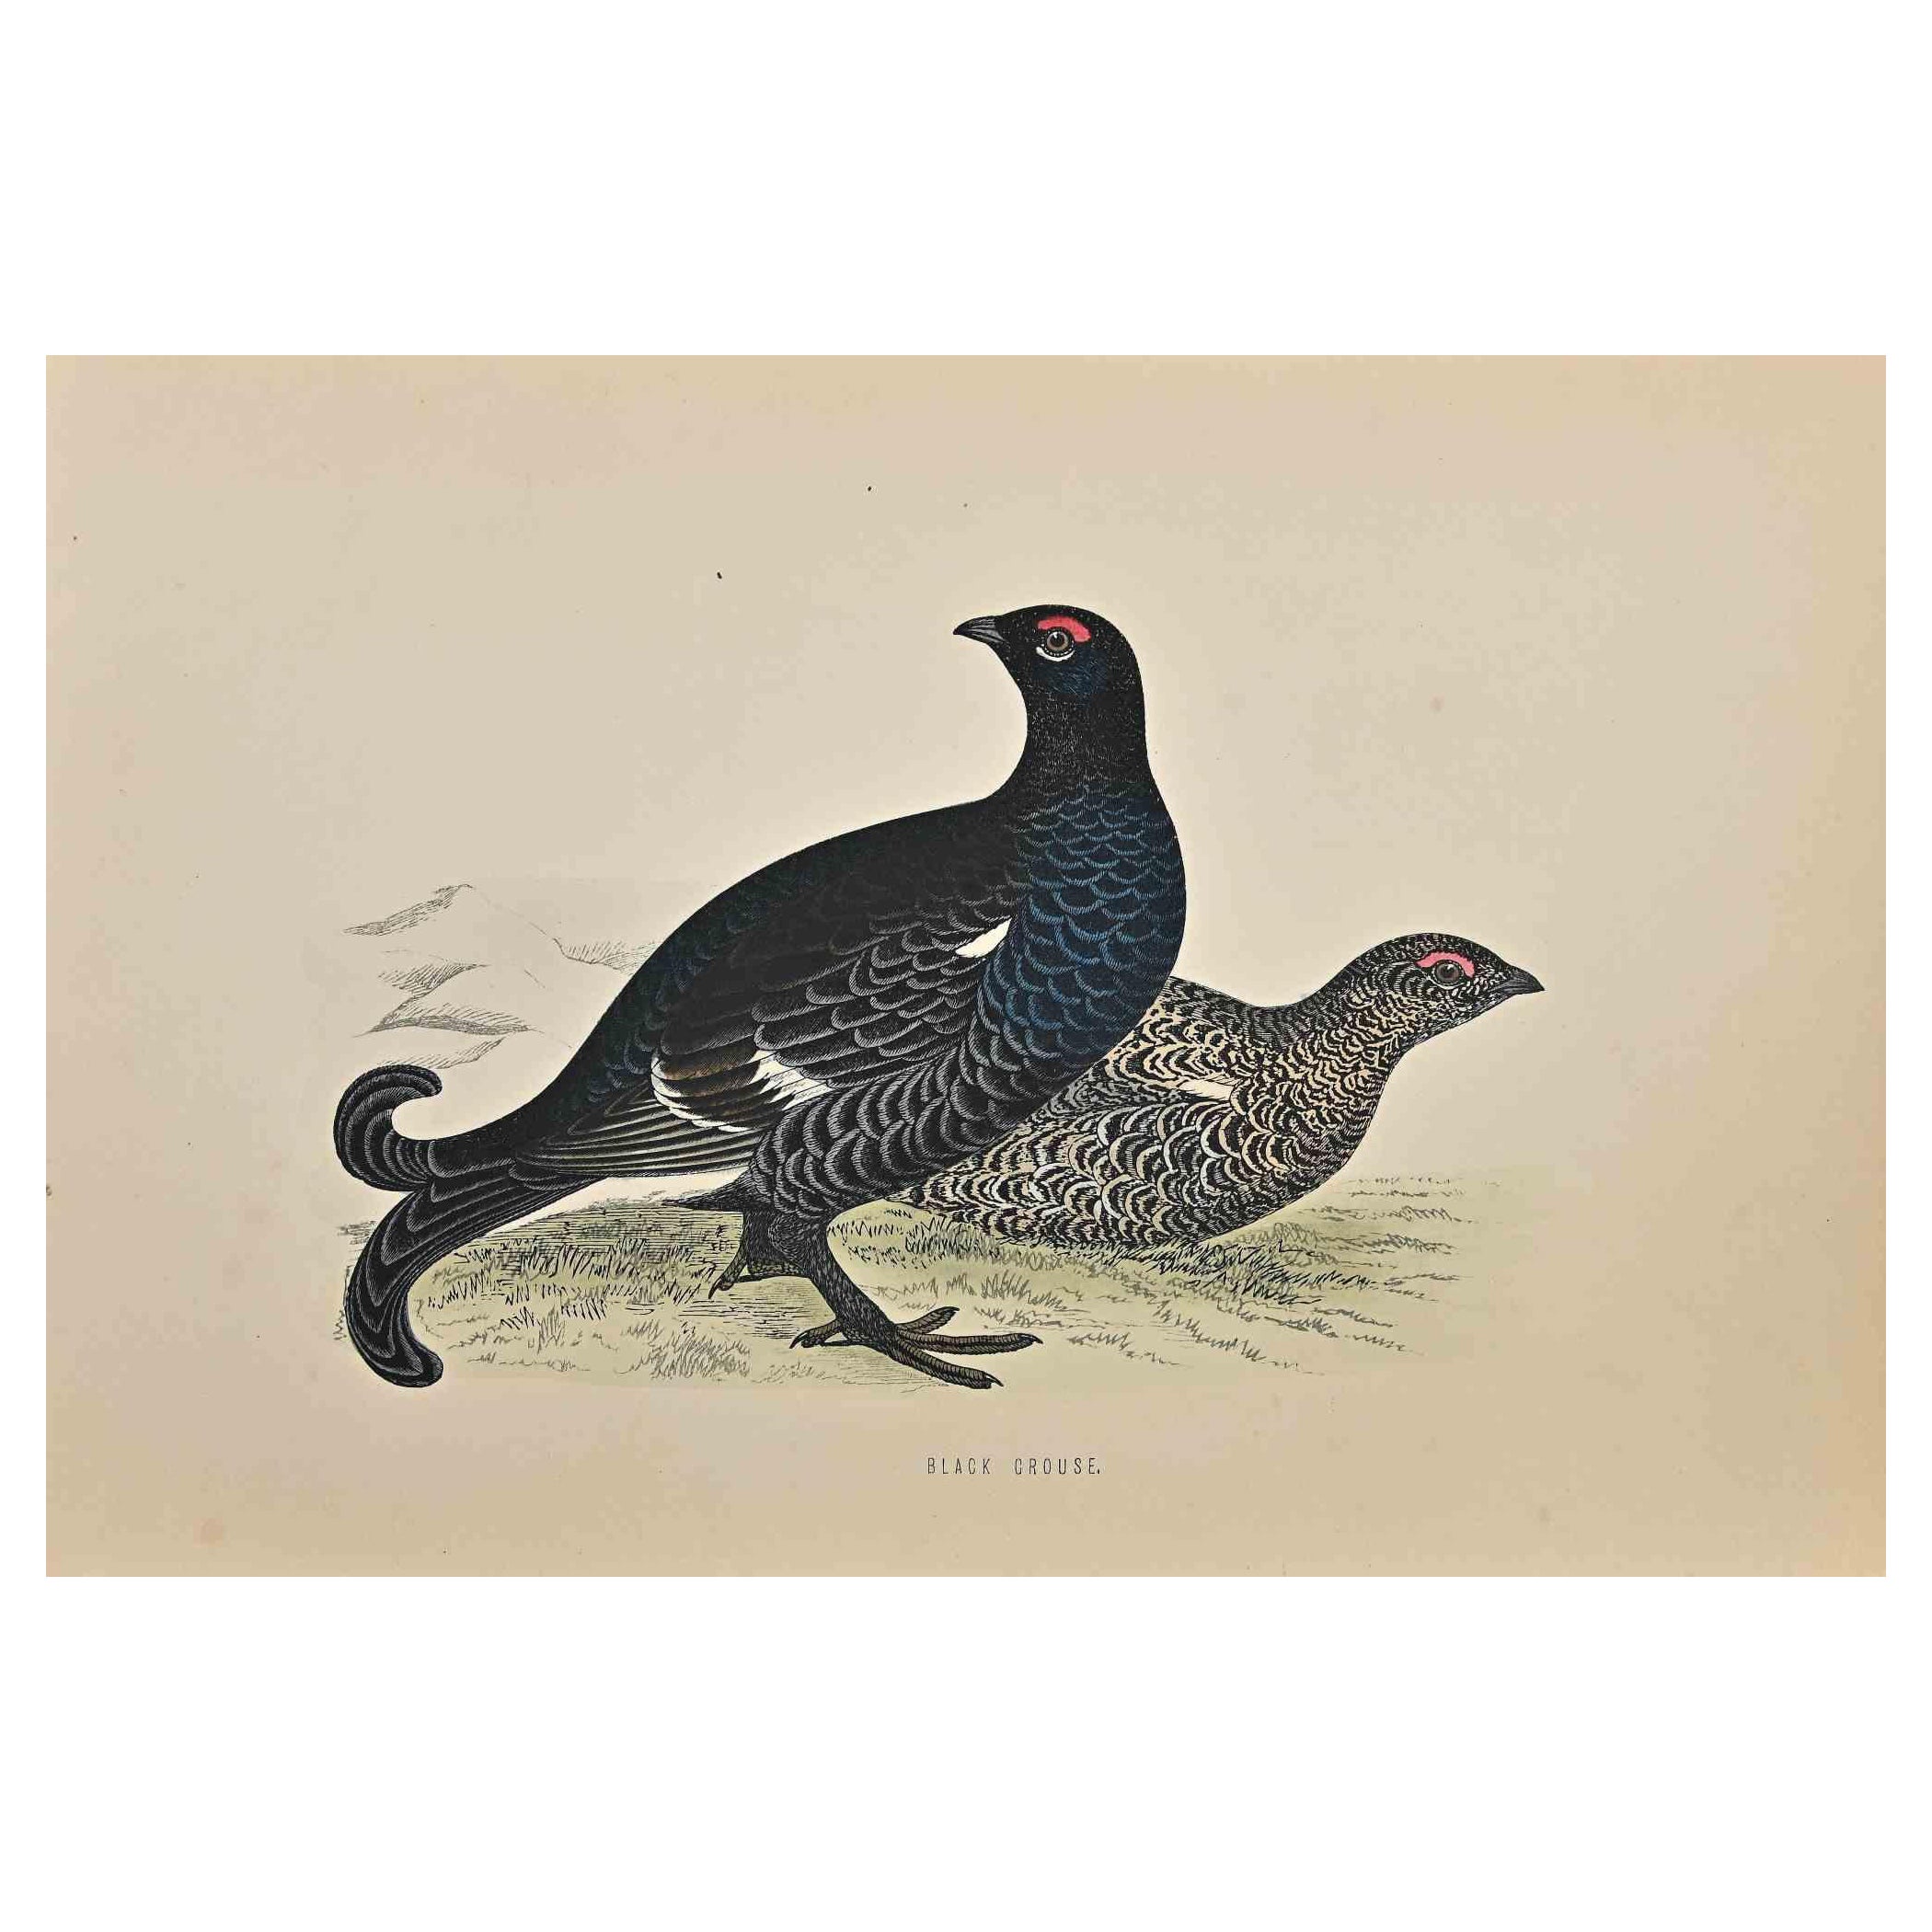  Black Grouse is a modern artwork realized in 1870 by the British artist Alexander Francis Lydon (1836-1917) . 

Woodcut print, hand colored, published by London, Bell & Sons, 1870.  Name of the bird printed in plate. This work is part of a print